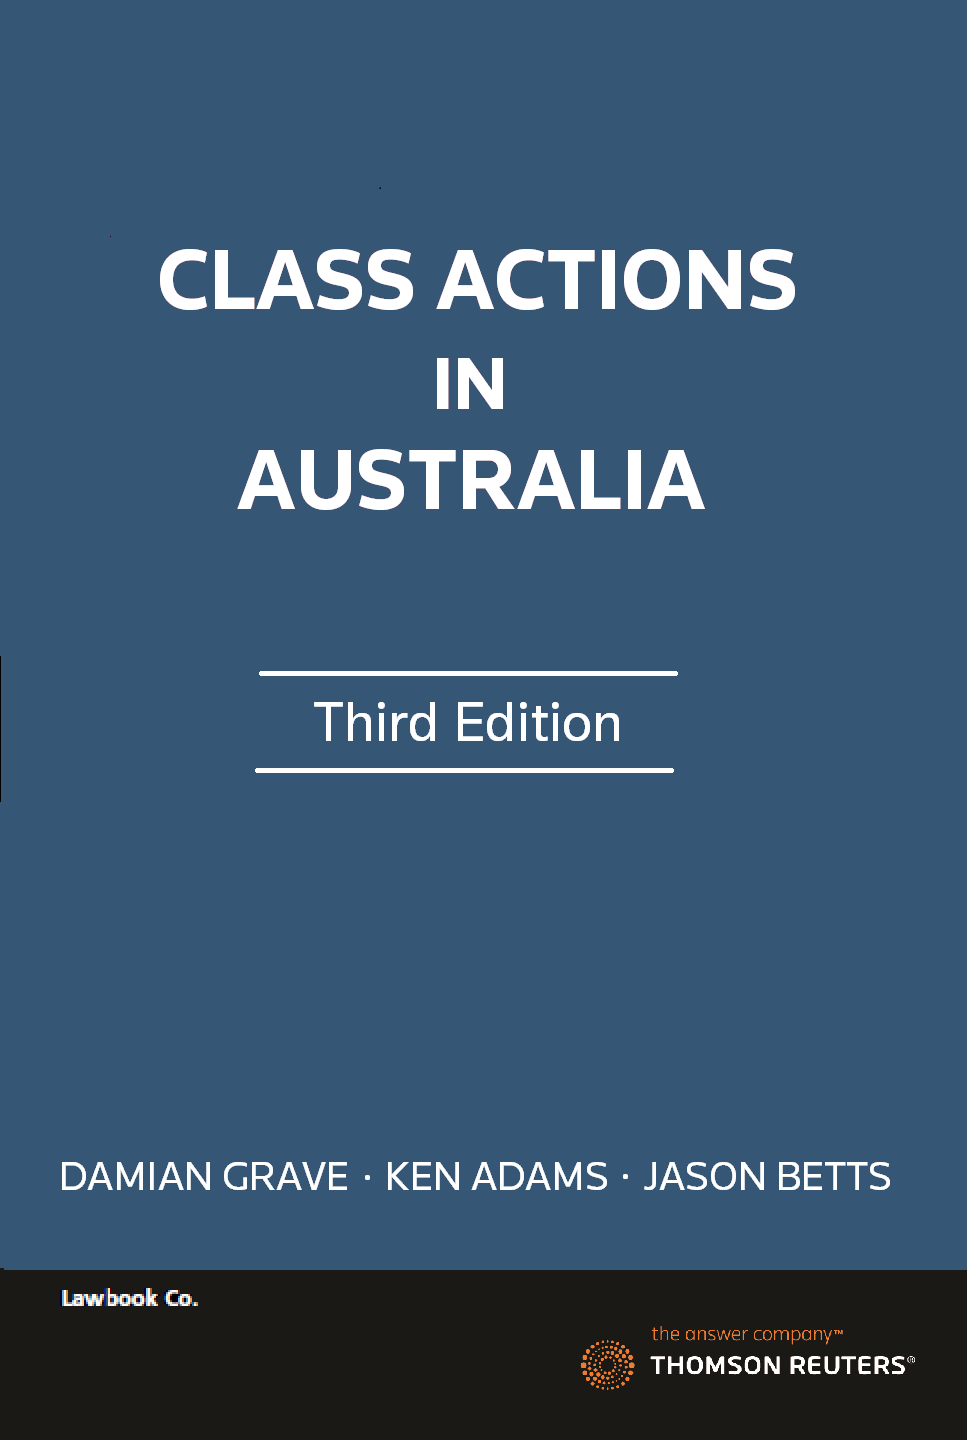 Class Actions in Australia 3rd Edition - Softcover Book & eBook